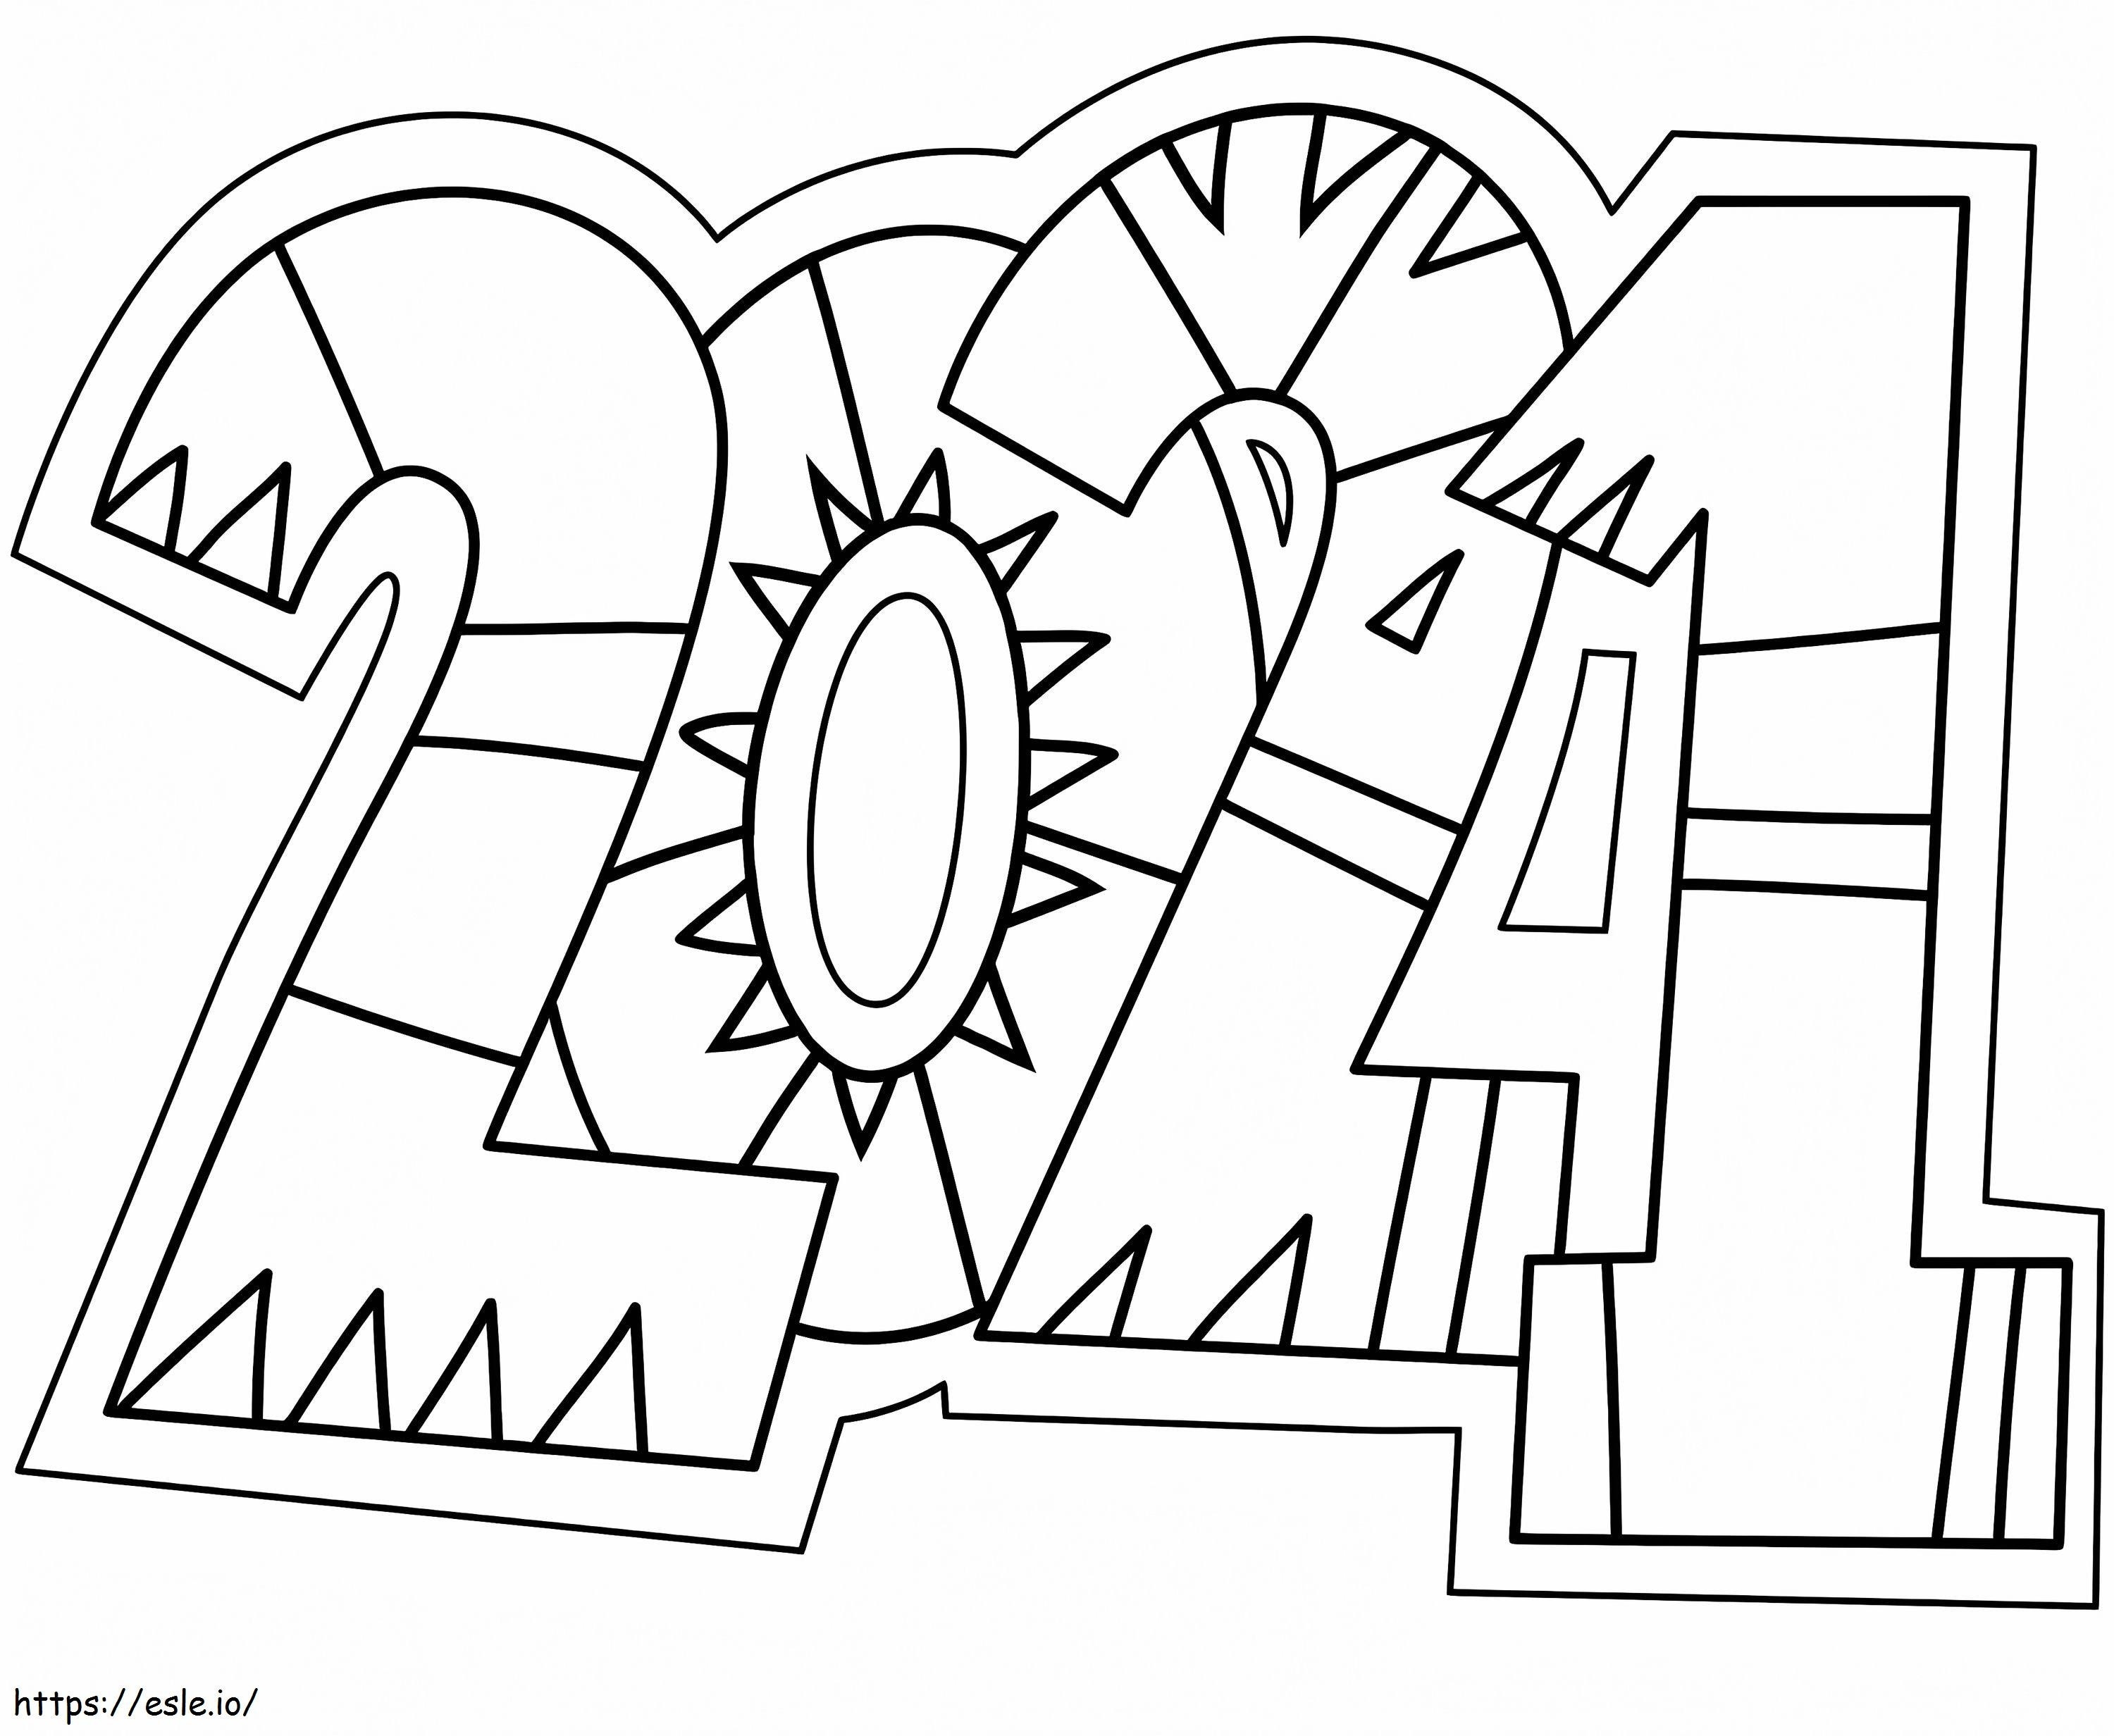 Year 2021 Doodle coloring page